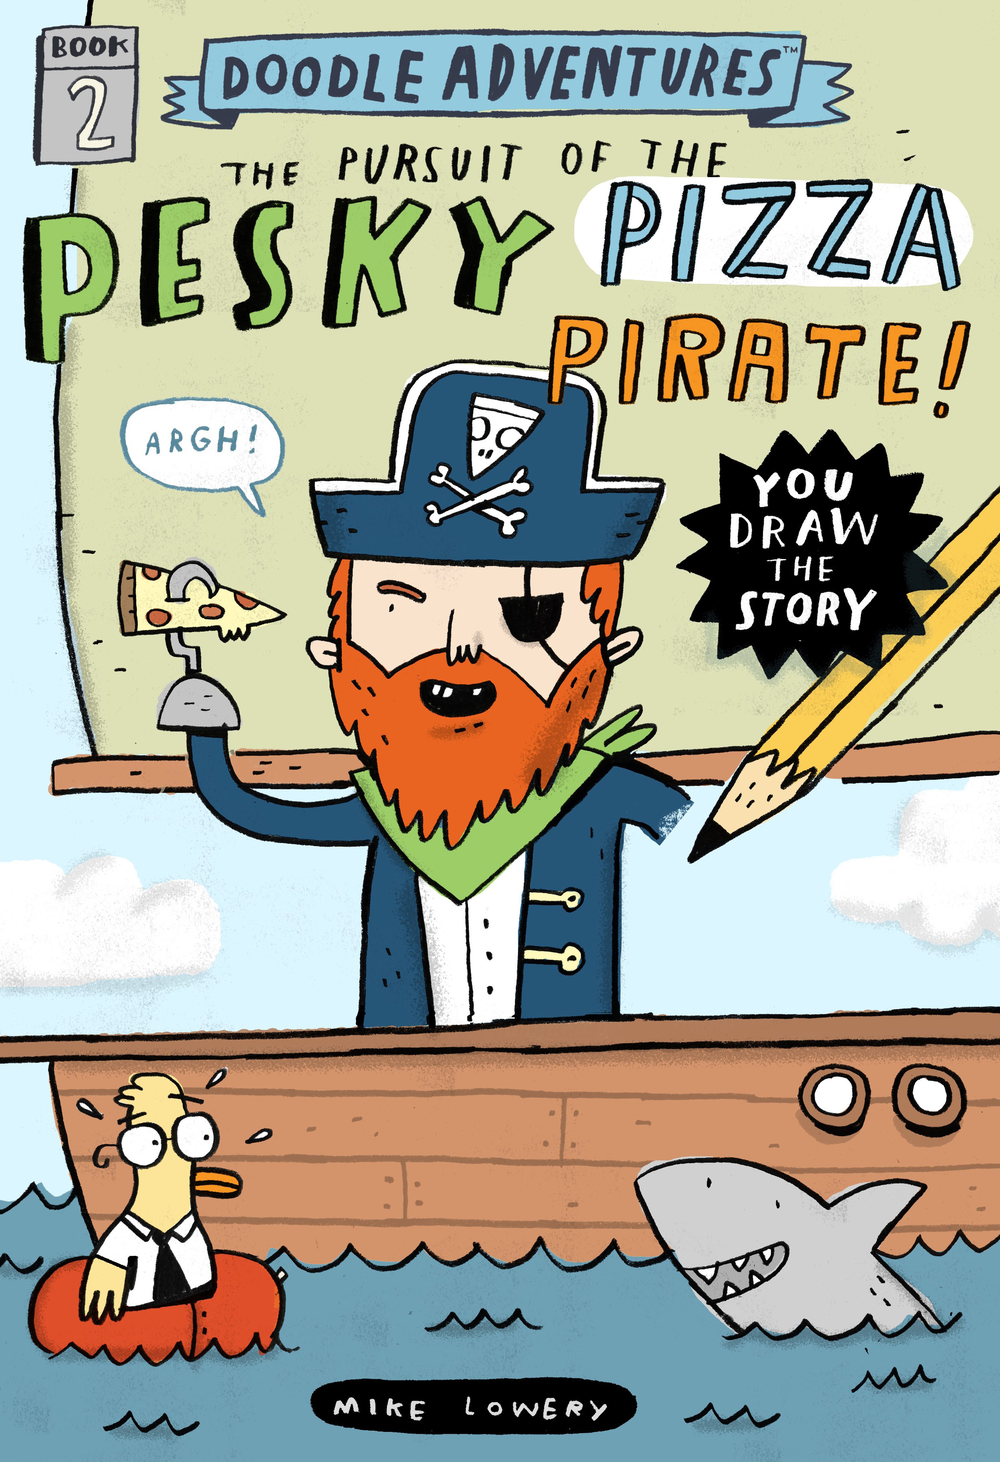 The cover of Atlanta illustrator Mike Lowery's latest book, 